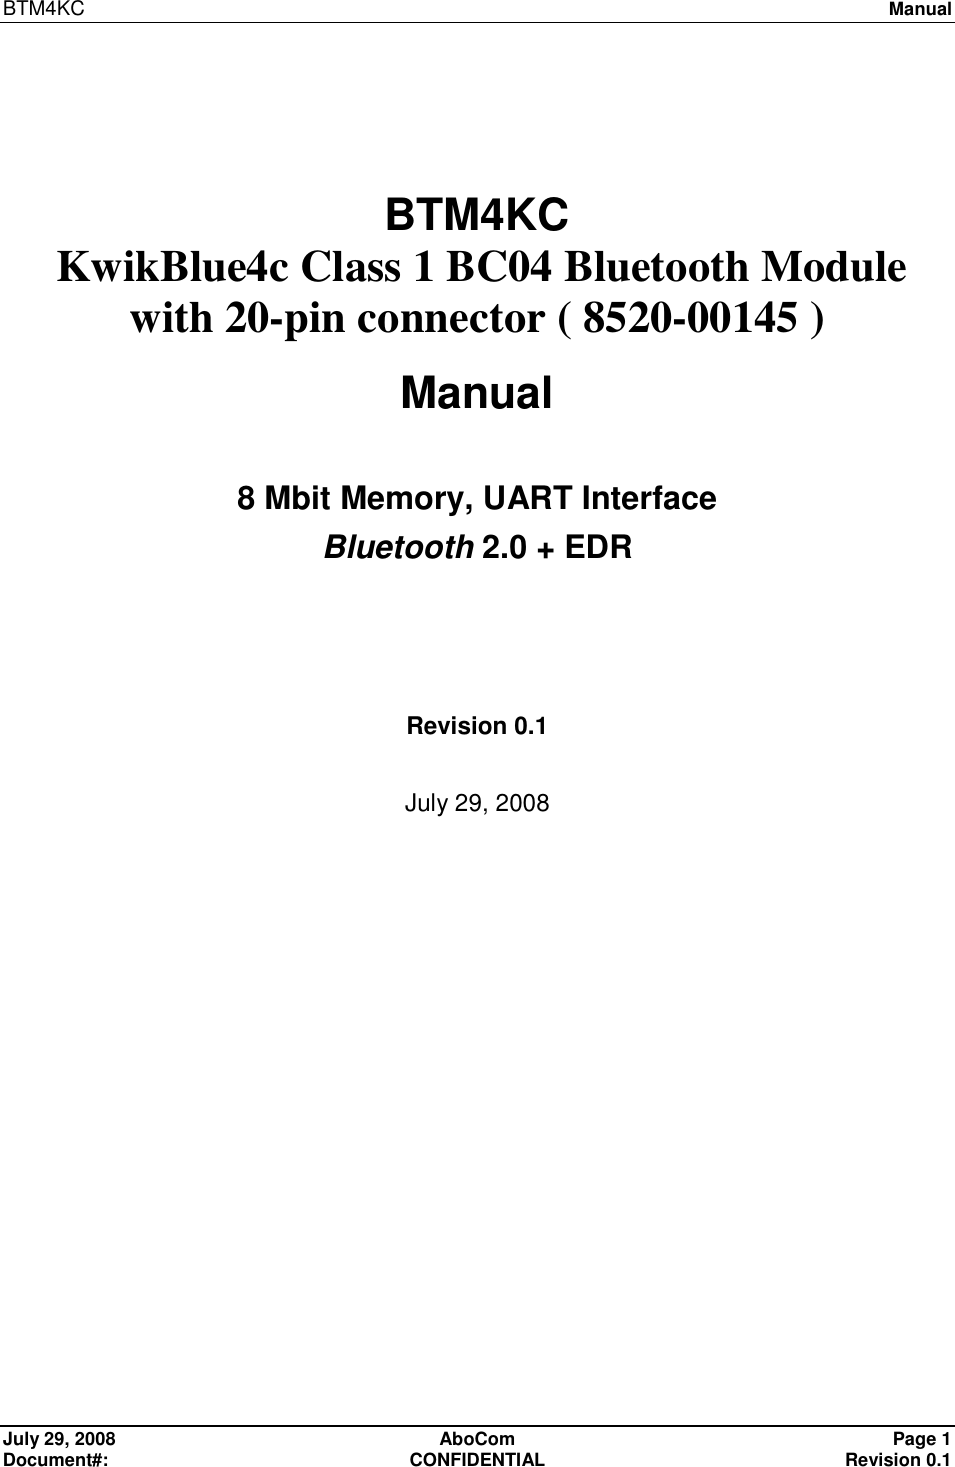 BTM4KC   Manual  July 29, 2008  AboCom  Page 1 Document#:  CONFIDENTIAL  Revision 0.1 BTM4KC    KwikBlue4c Class 1 BC04 Bluetooth Module with 20-pin connector ( 8520-00145 )  Manual 8 Mbit Memory, UART Interface Bluetooth 2.0 + EDR  Revision 0.1 July 29, 2008  